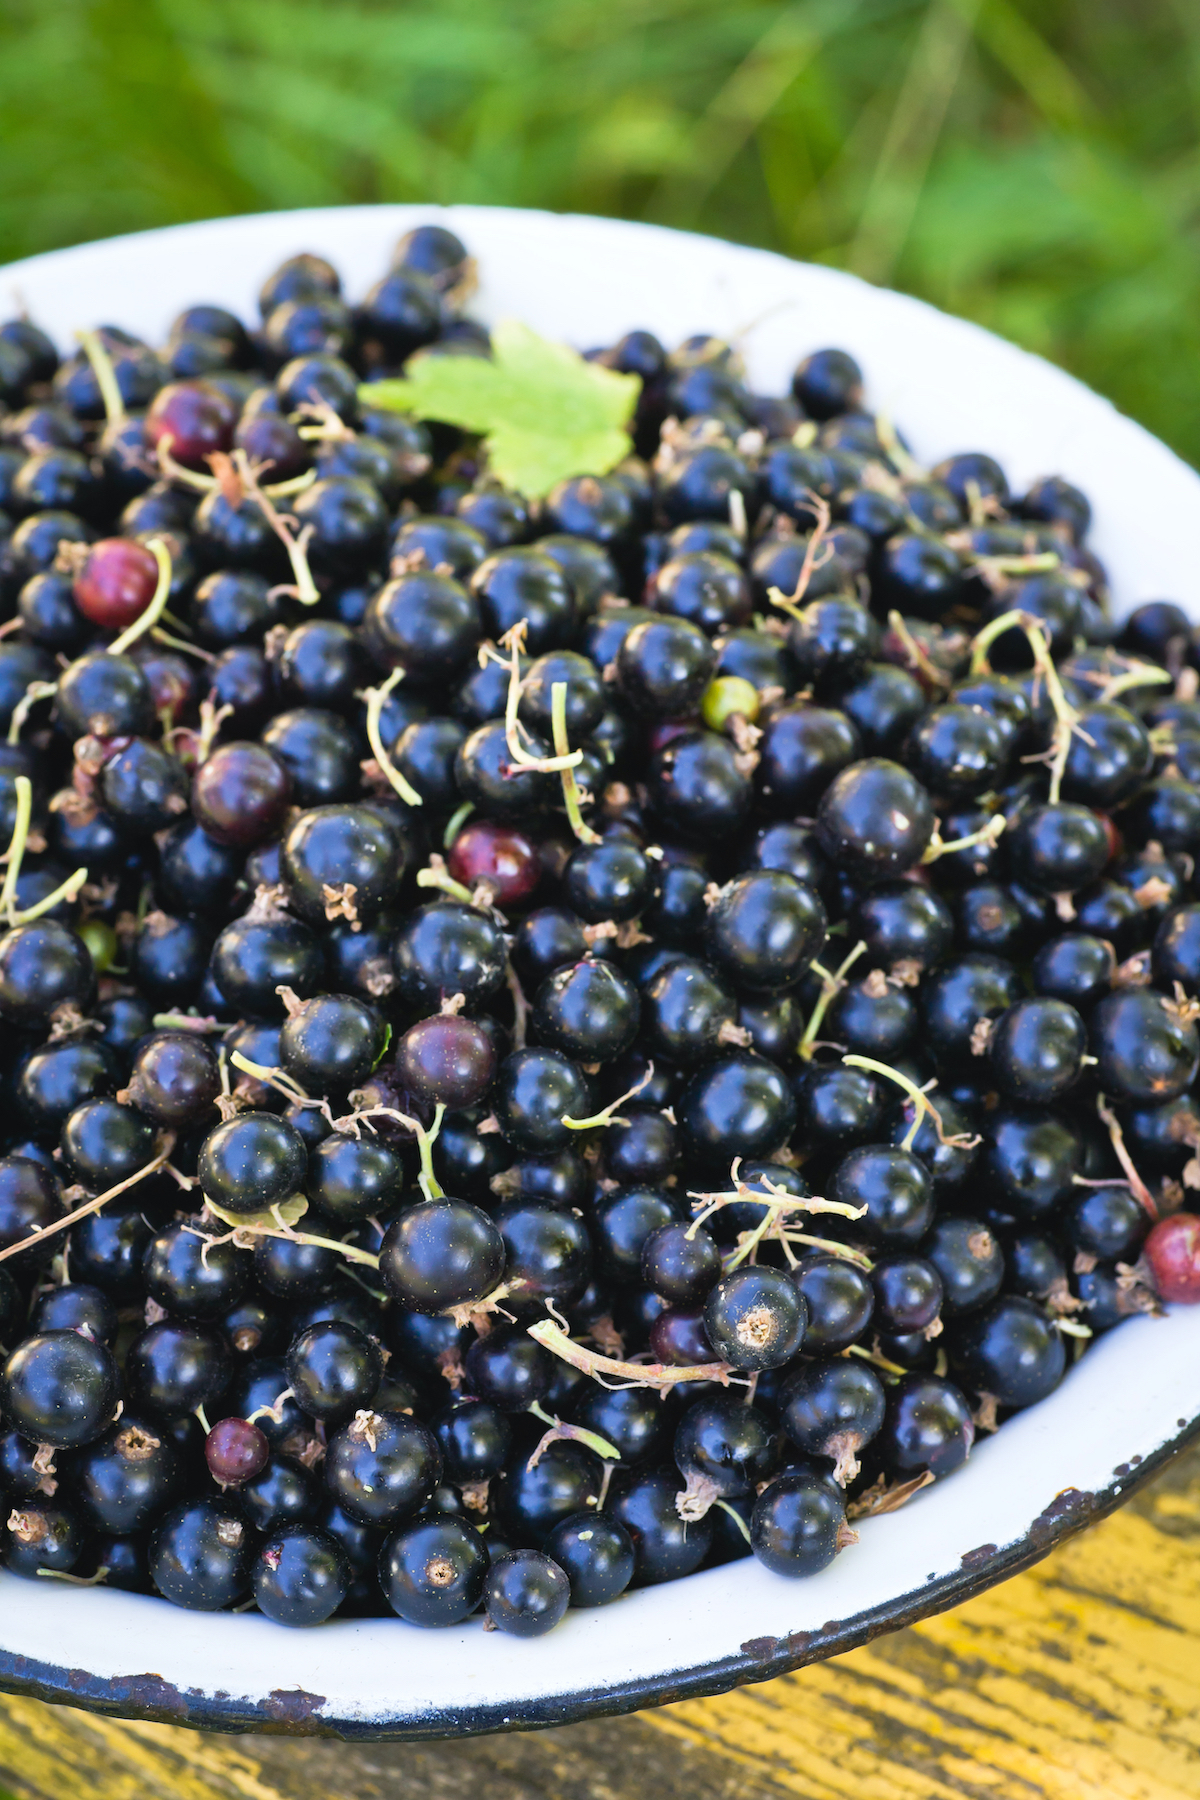 Black currants in a bowl